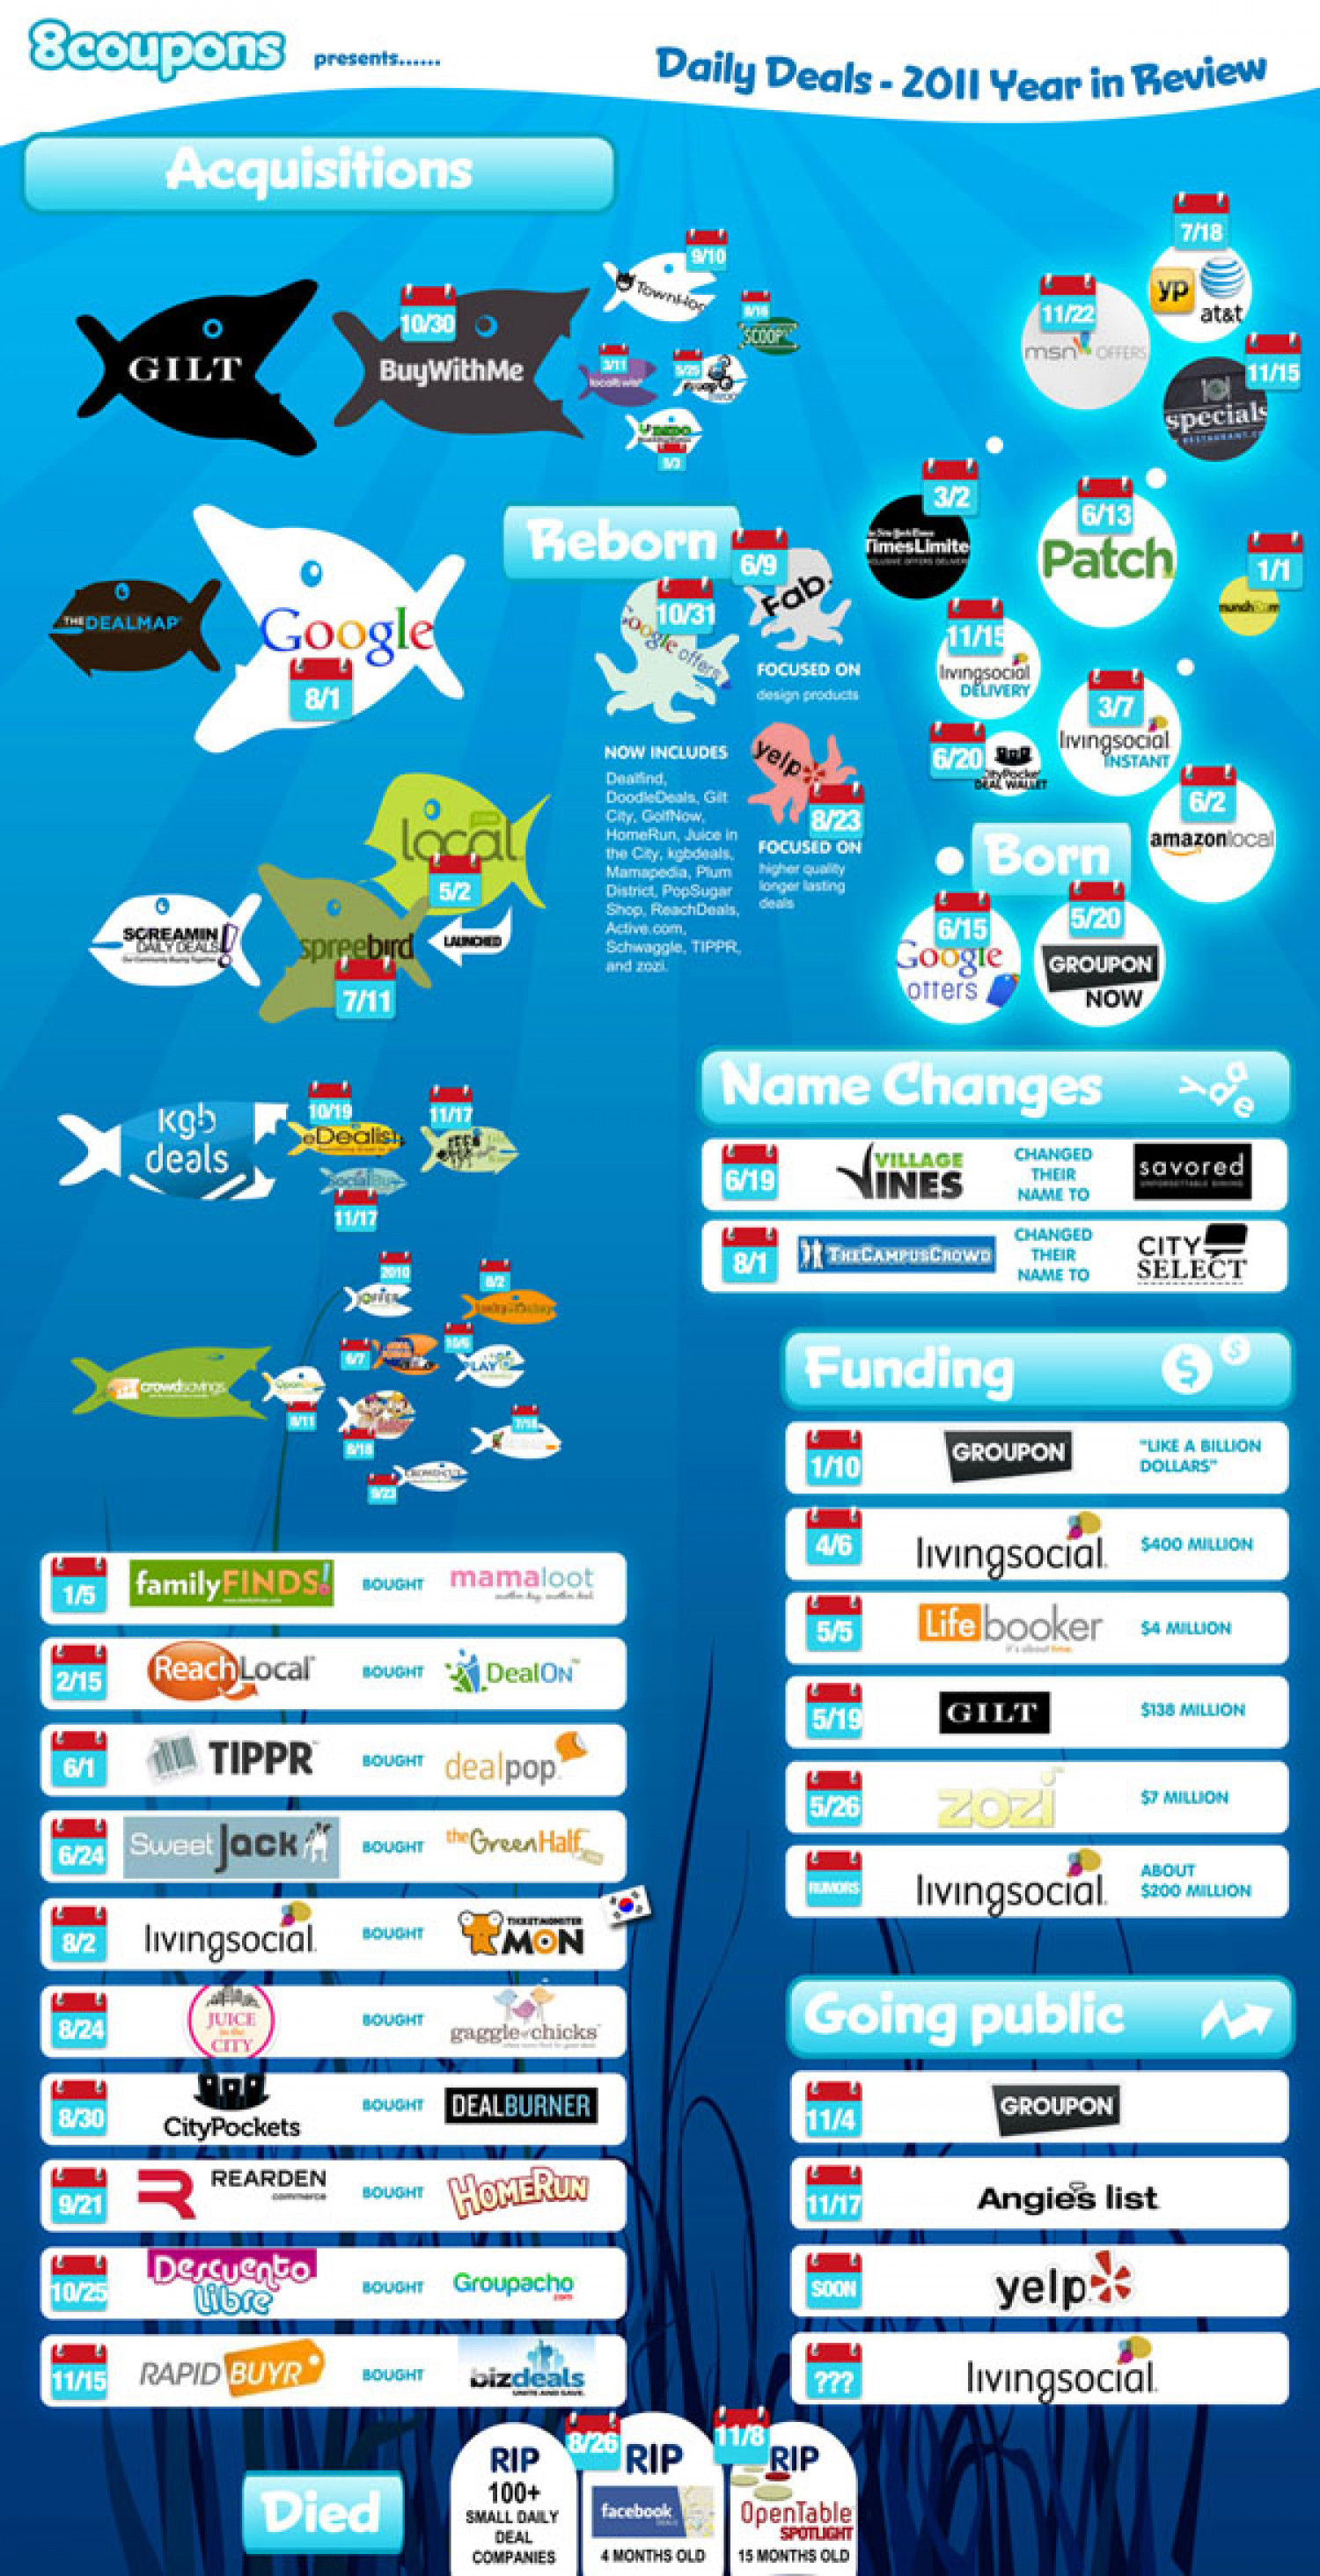 Daily Deals Year in Review 2011 Infographic